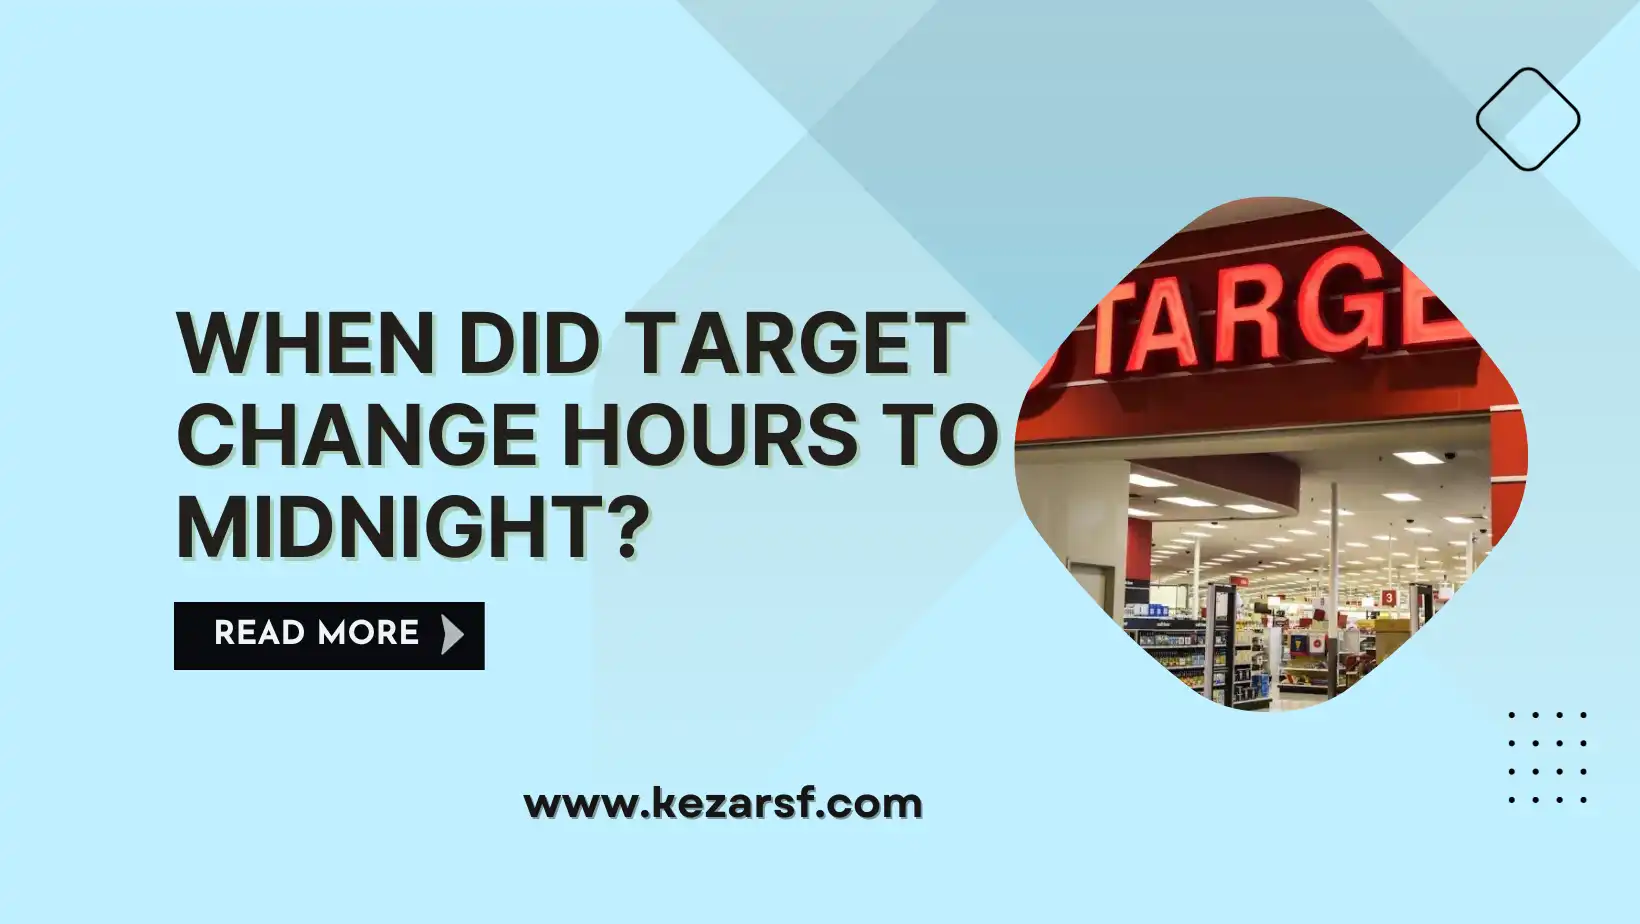 When Did Target Change Hours to Midnight?